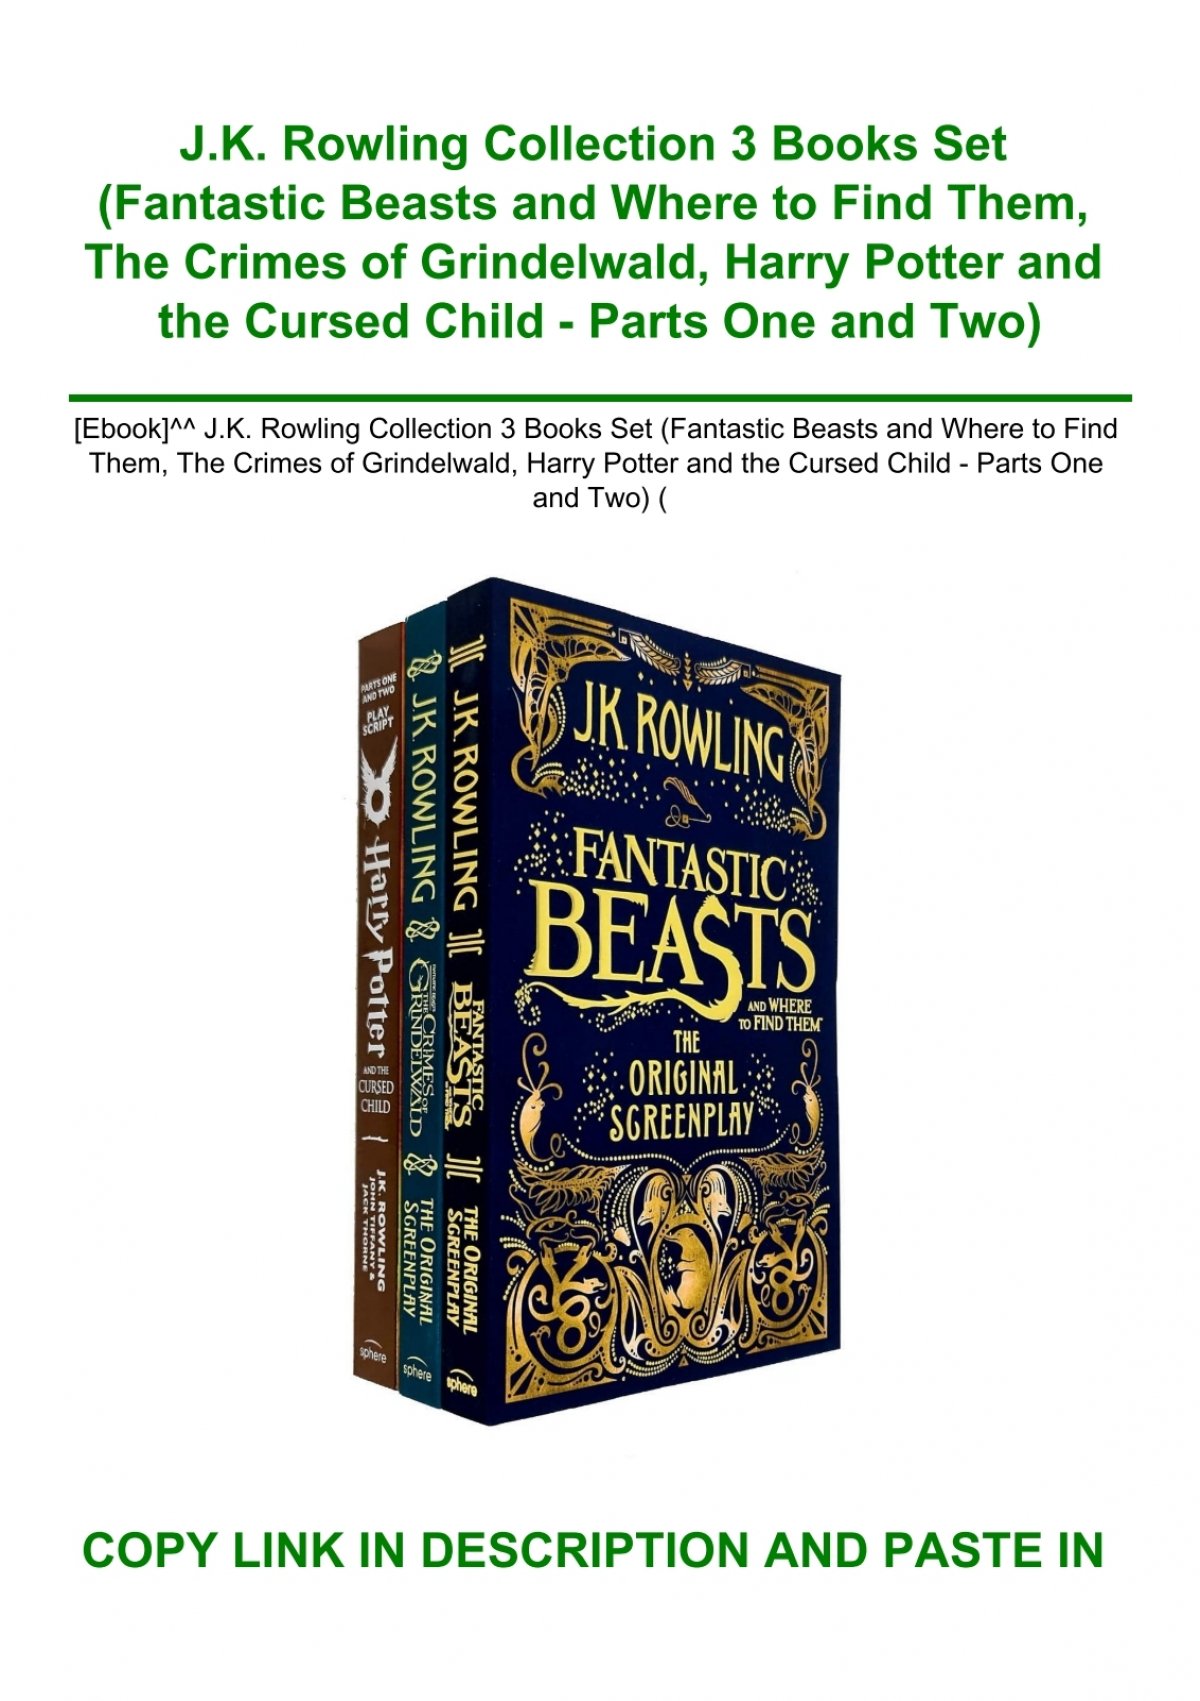 JK Rowling Collection 3 Books Set (Fantastic Beasts and Where to Find Them,  The Crimes of Grindelwald, Harry Potter and the Cursed Child - Parts One